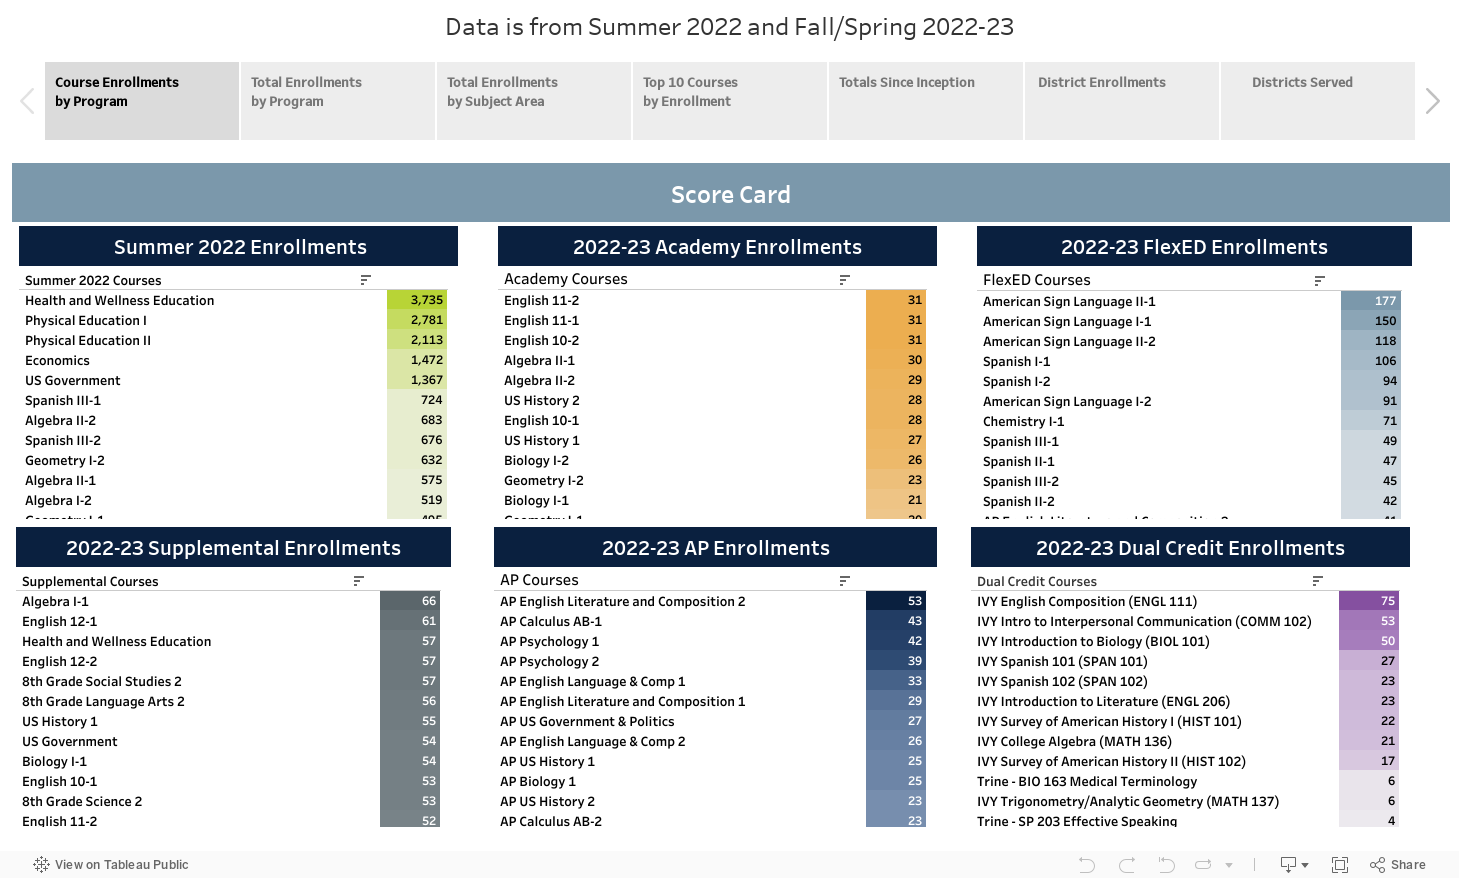 Data is from Summer 2022 and Fall/Spring 2022-23 